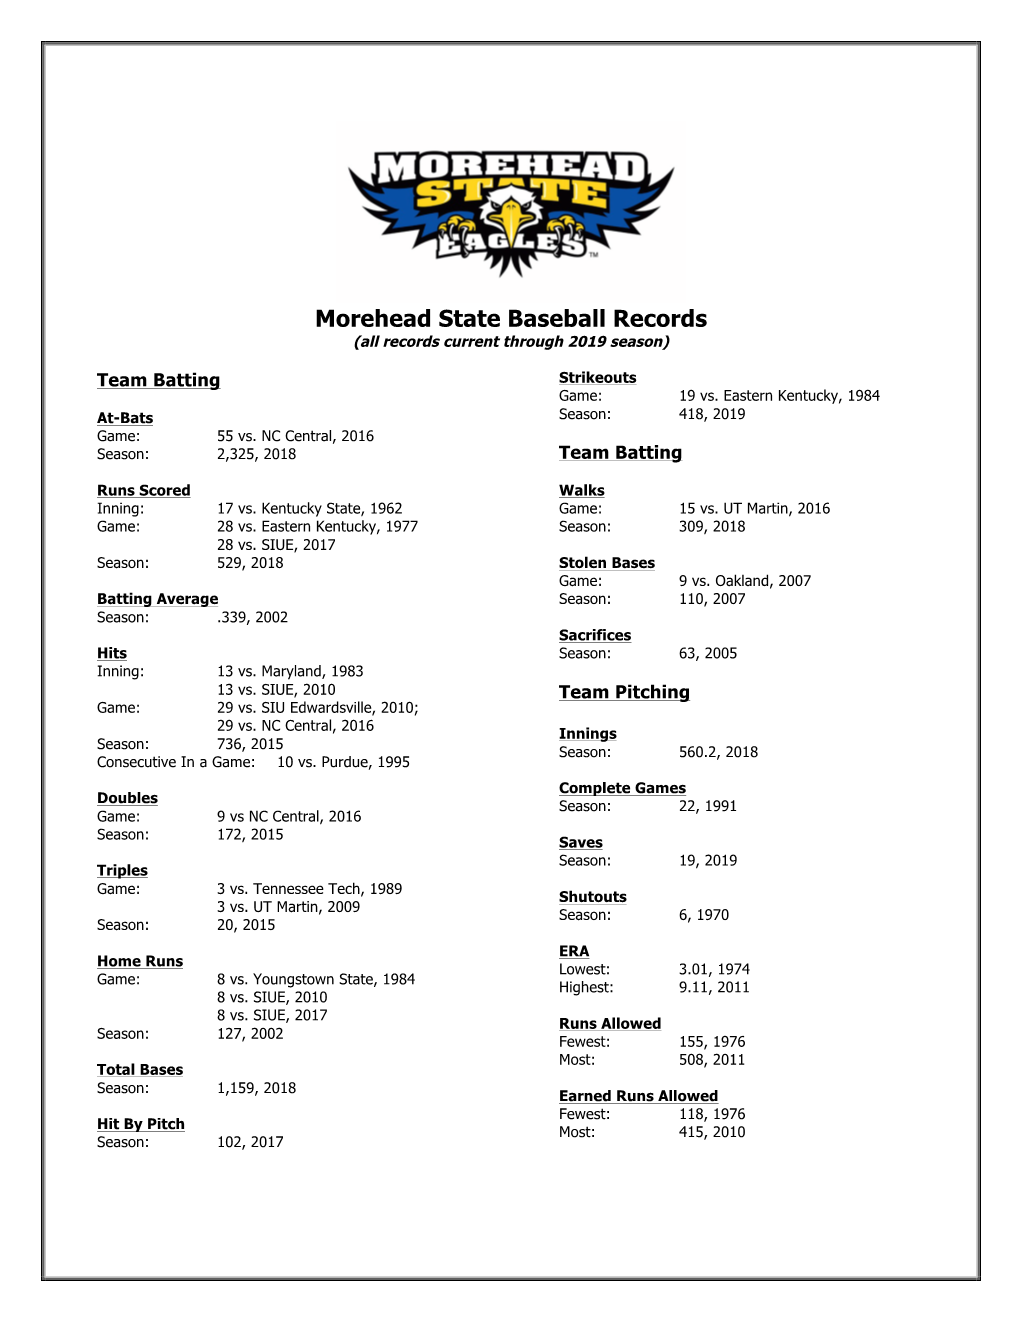 Morehead State Baseball Records (All Records Current Through 2019 Season)